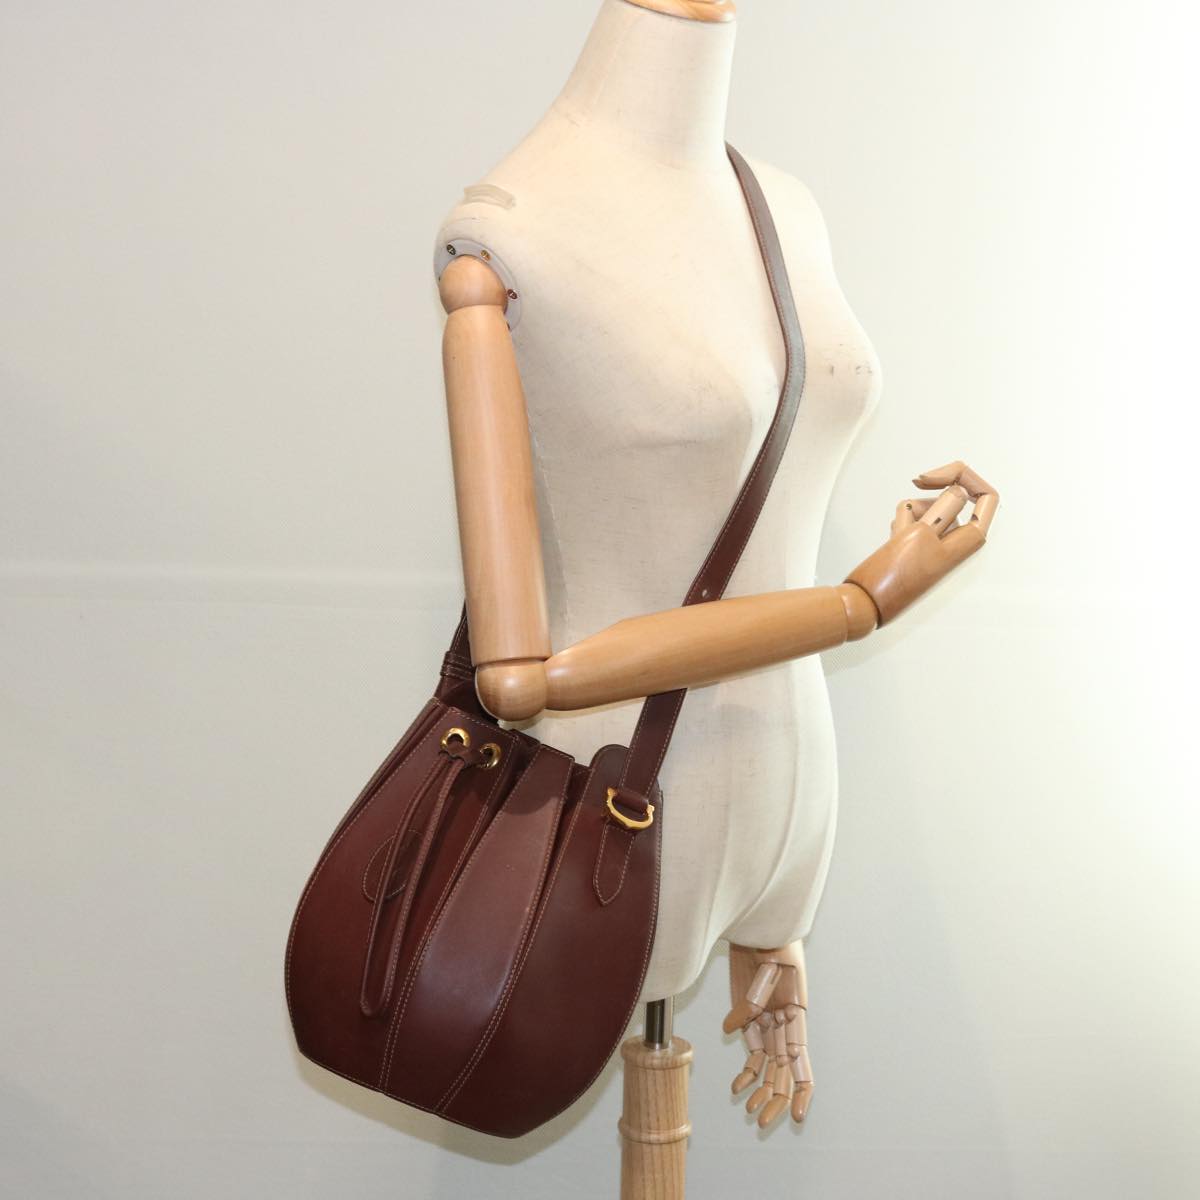 CARTIER Shoulder Bag Leather Wine Red Auth 65892